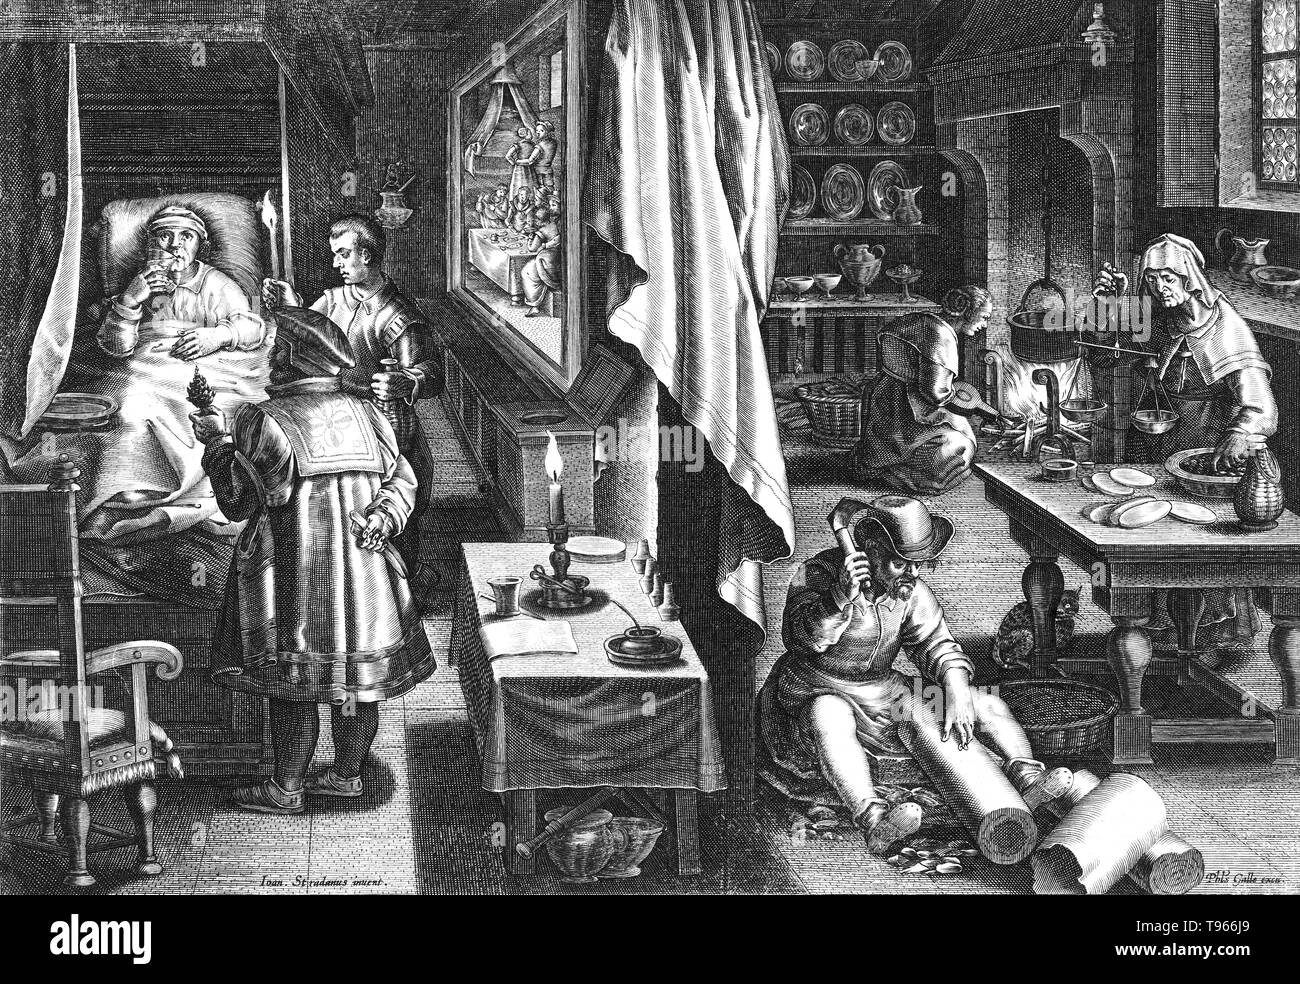 PLATE 6. The Discovery of Guaiacum as a Cure for Venereal Infection, Sixth plate from a print series entitled Nova Reperta (New Inventions of Modern Times) consisting of a title page and 19 plates, engraved by Jan Collaert I, after Jan van der Straet, called Stradanus, and published by Philips Galle. Illustration of two rooms, each containing different occupants performing diverse tasks. On the left side an elderly man is depicted ill in bed while two men attend to him. Stock Photo